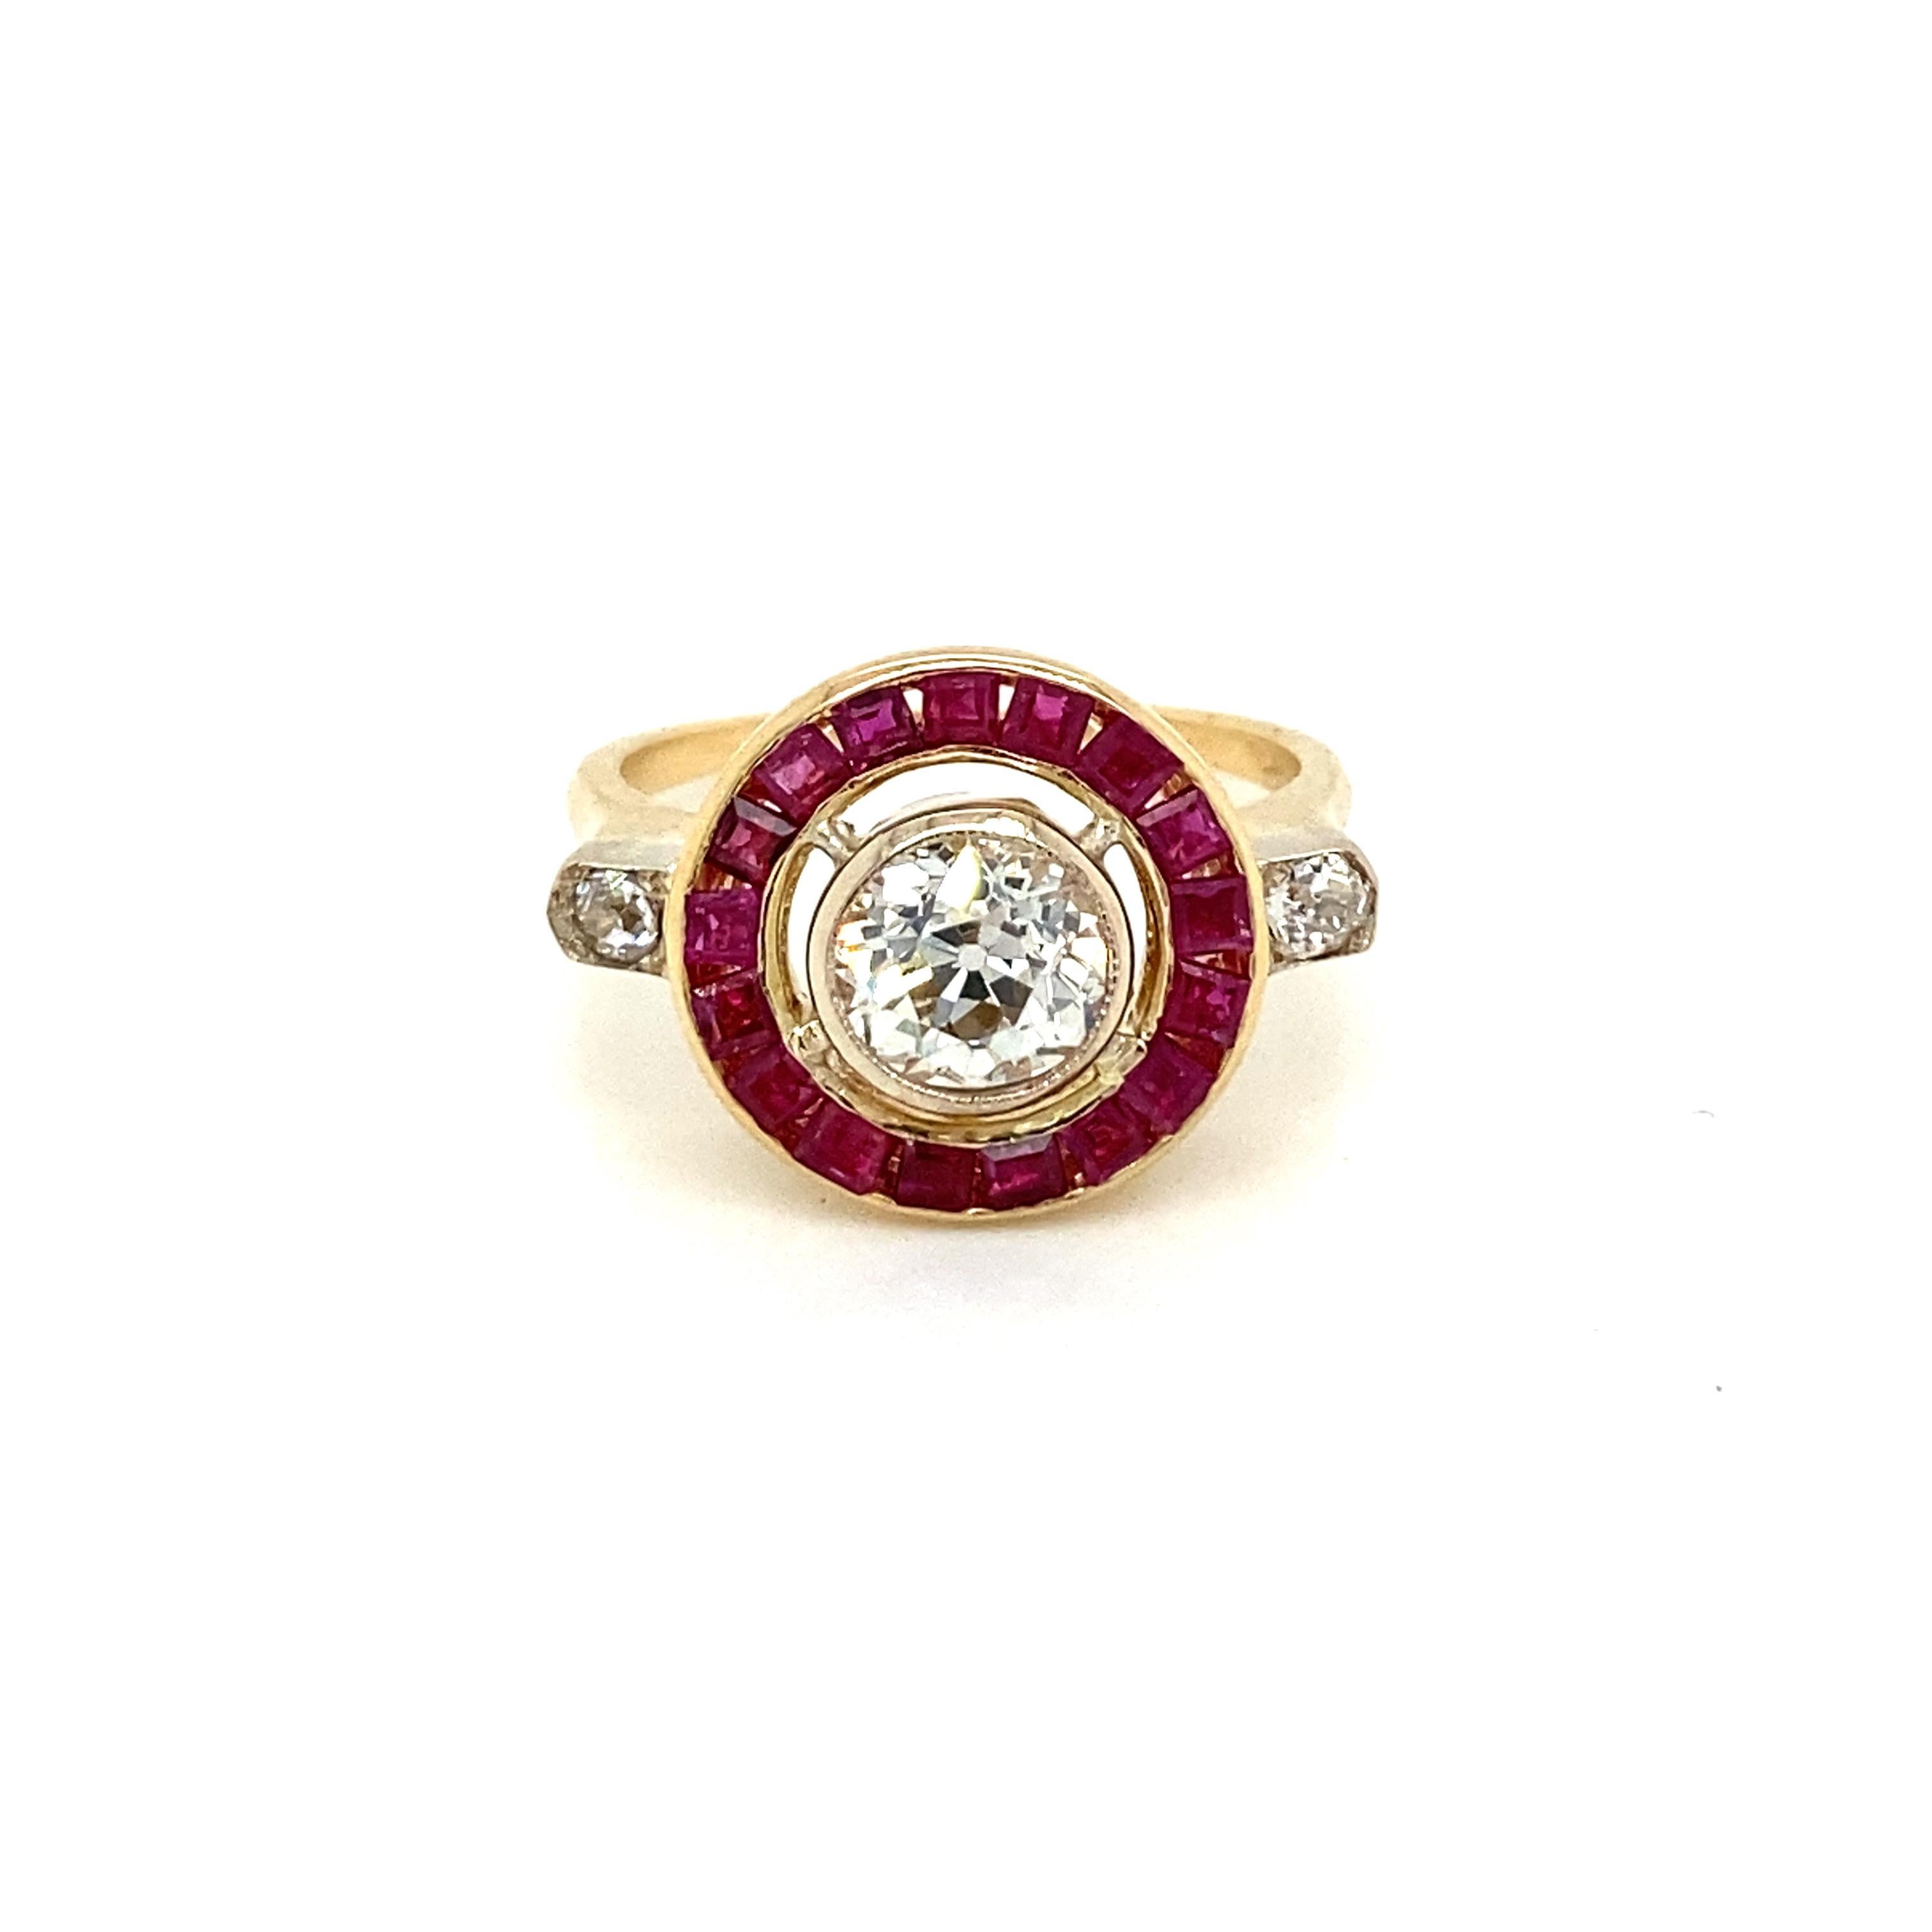 Pretty and authentic Art Deco Engagement ring featuring one large Old Mine cut Diamond in the center, weight 1.12 carats I Color Vs2, and ruby custom cut. Entirely hand crafted in 18k gold, this beautiful ring dates to the 1930's.

CONDITION: